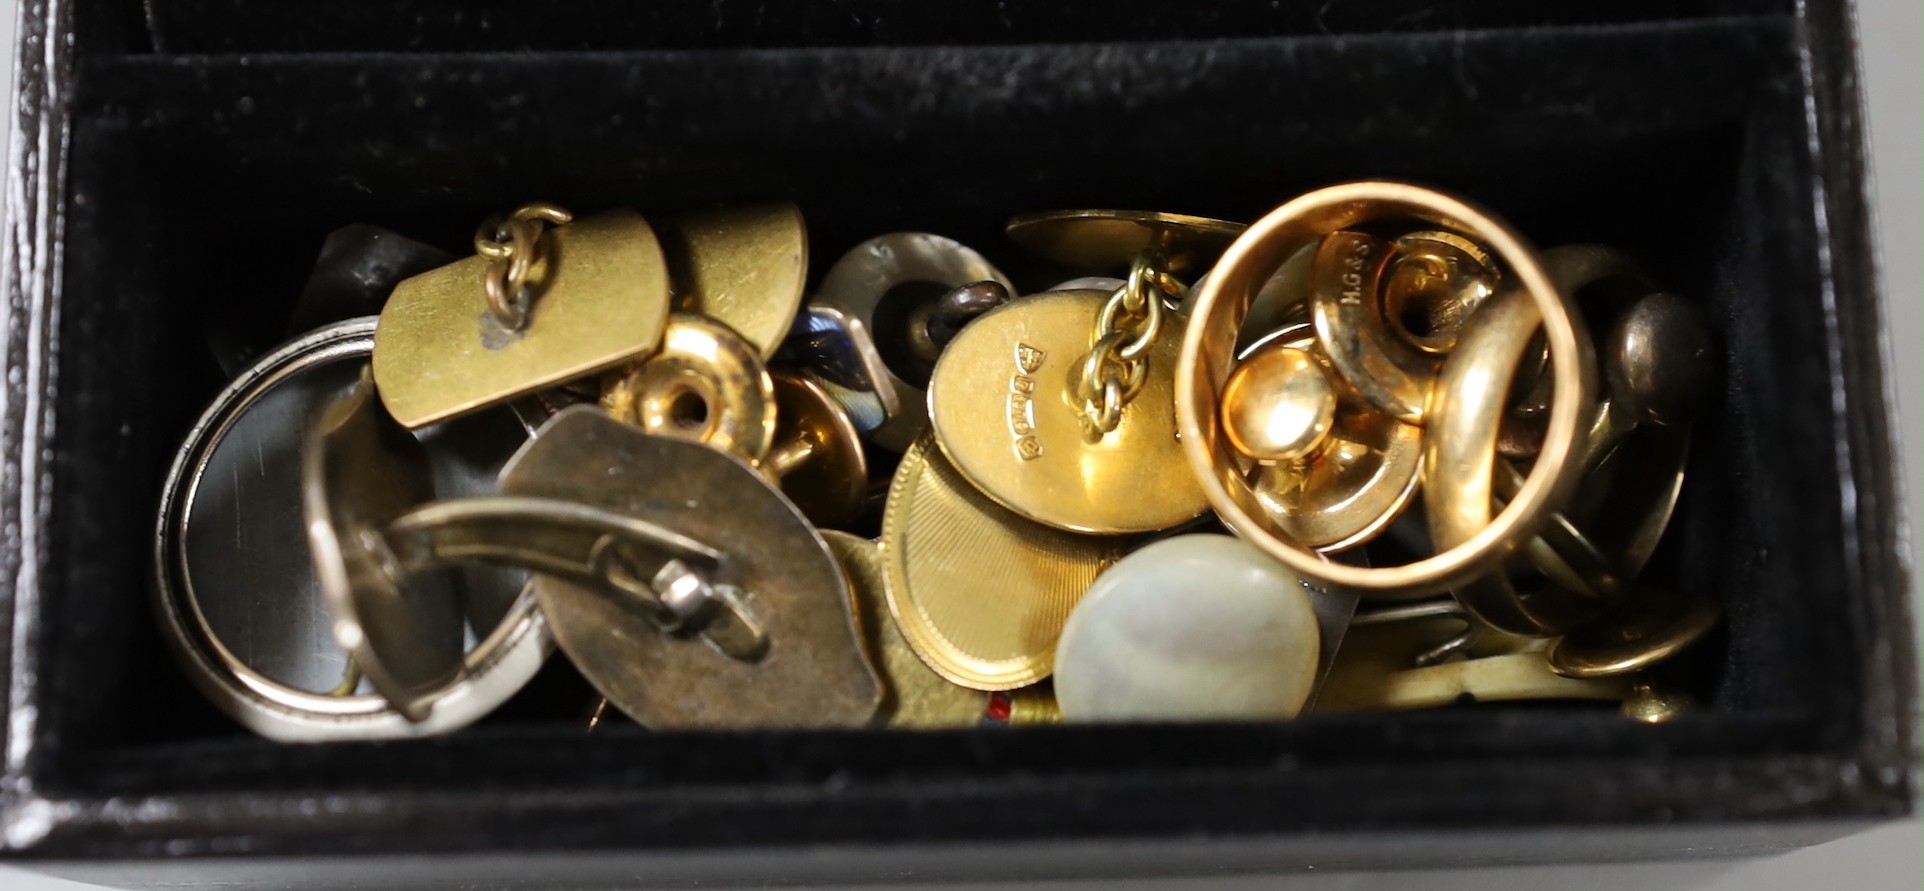 Two 9ct gold gold wedding bands, a pair of 9ct gold cufflinks, five assorted 9ct gold studs, 21.8 grams and other minor cufflinks, studs etc. including a pair of silver and enamel.